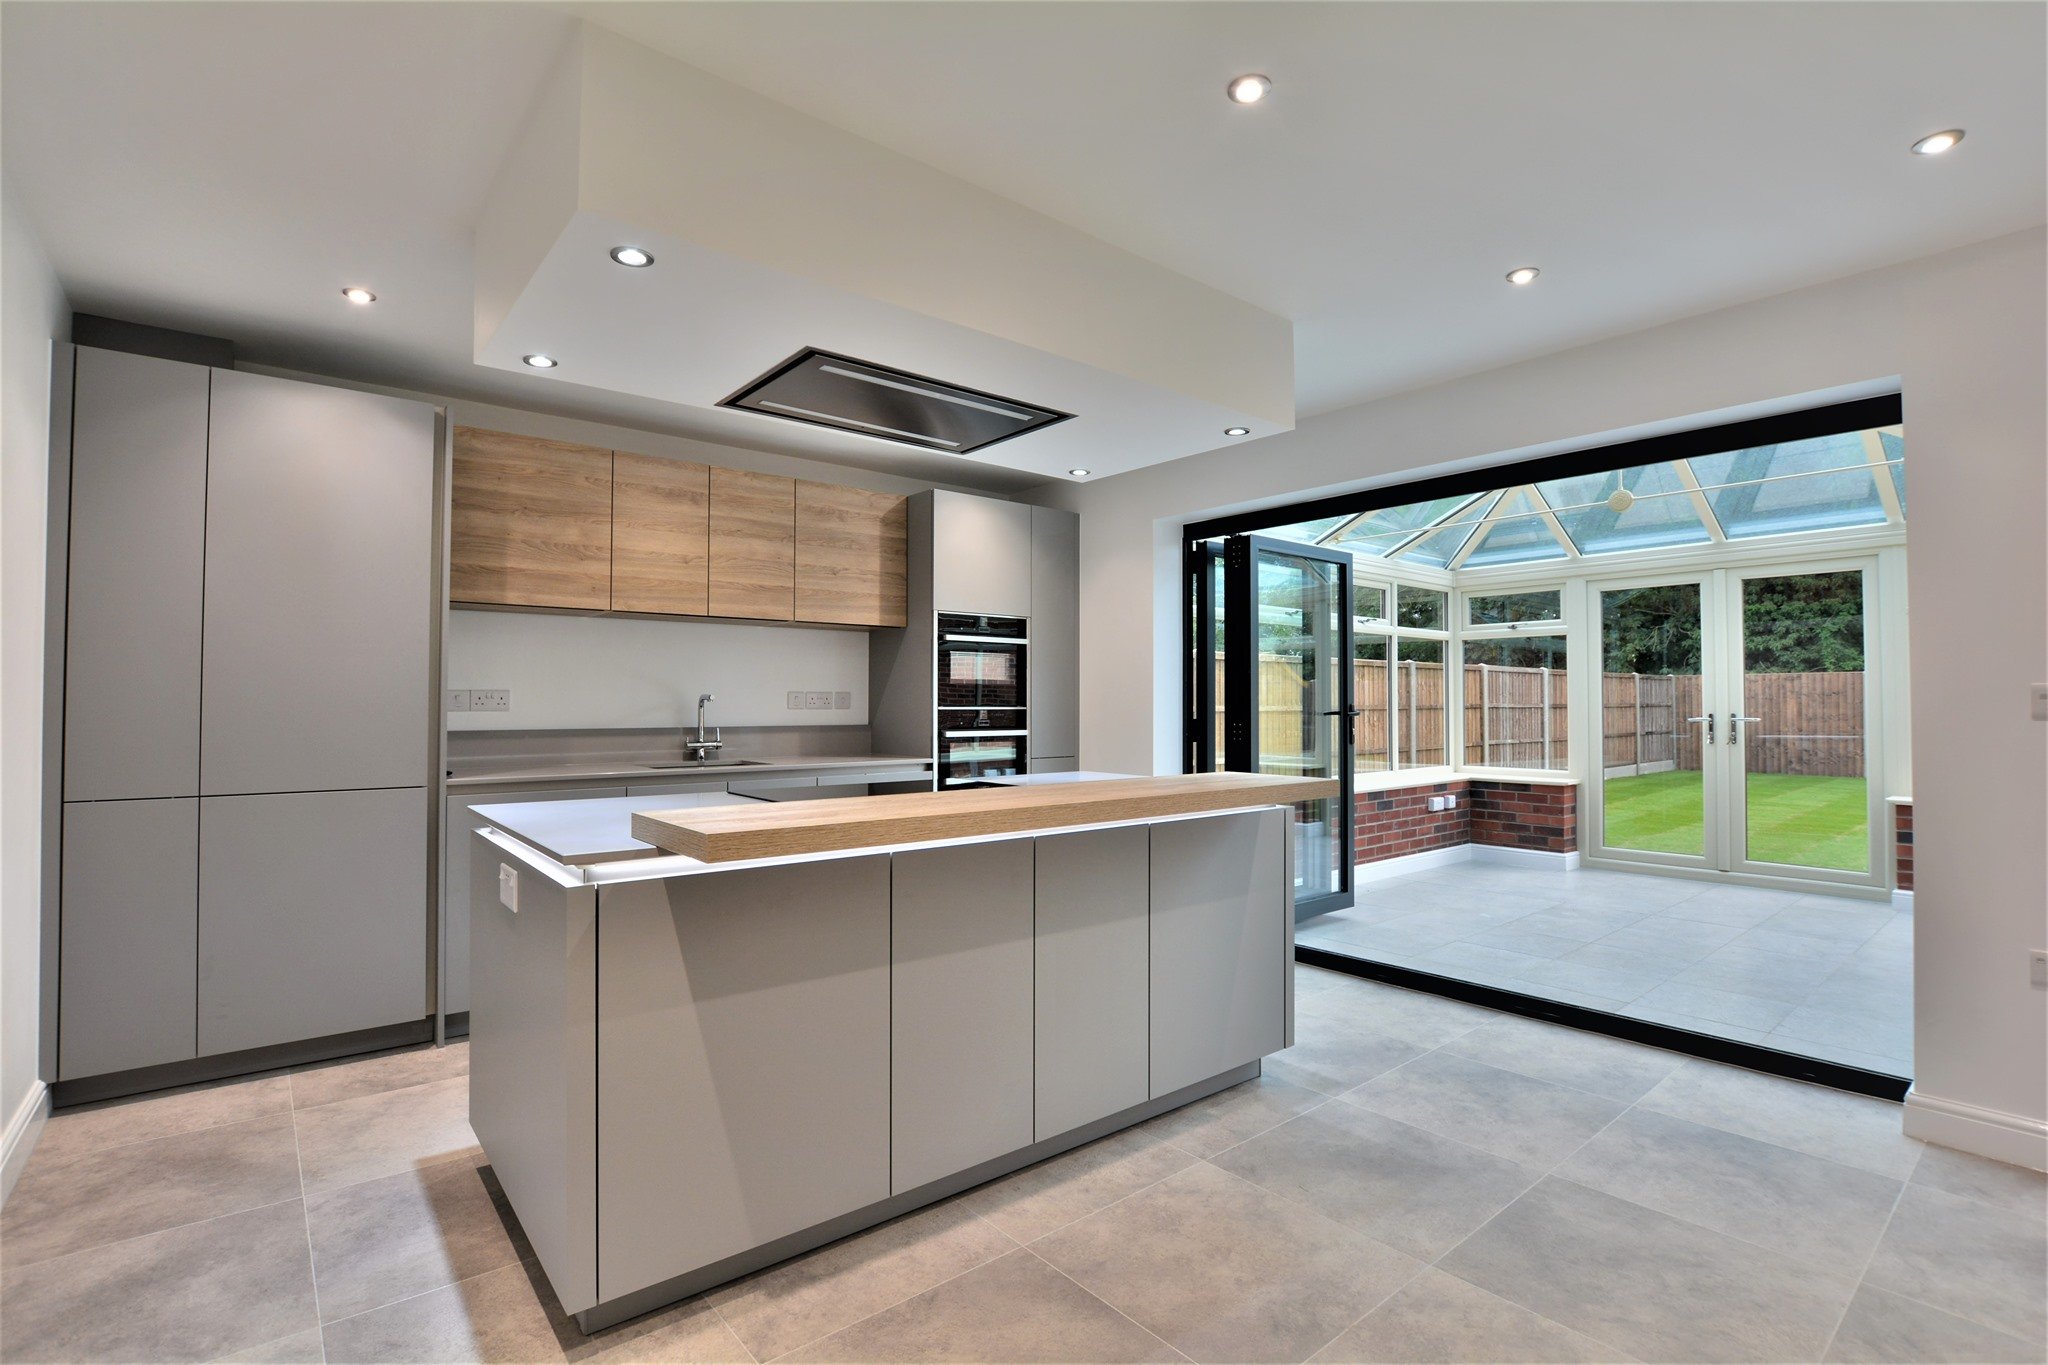 Gorgeous modern grey kitchen for new home